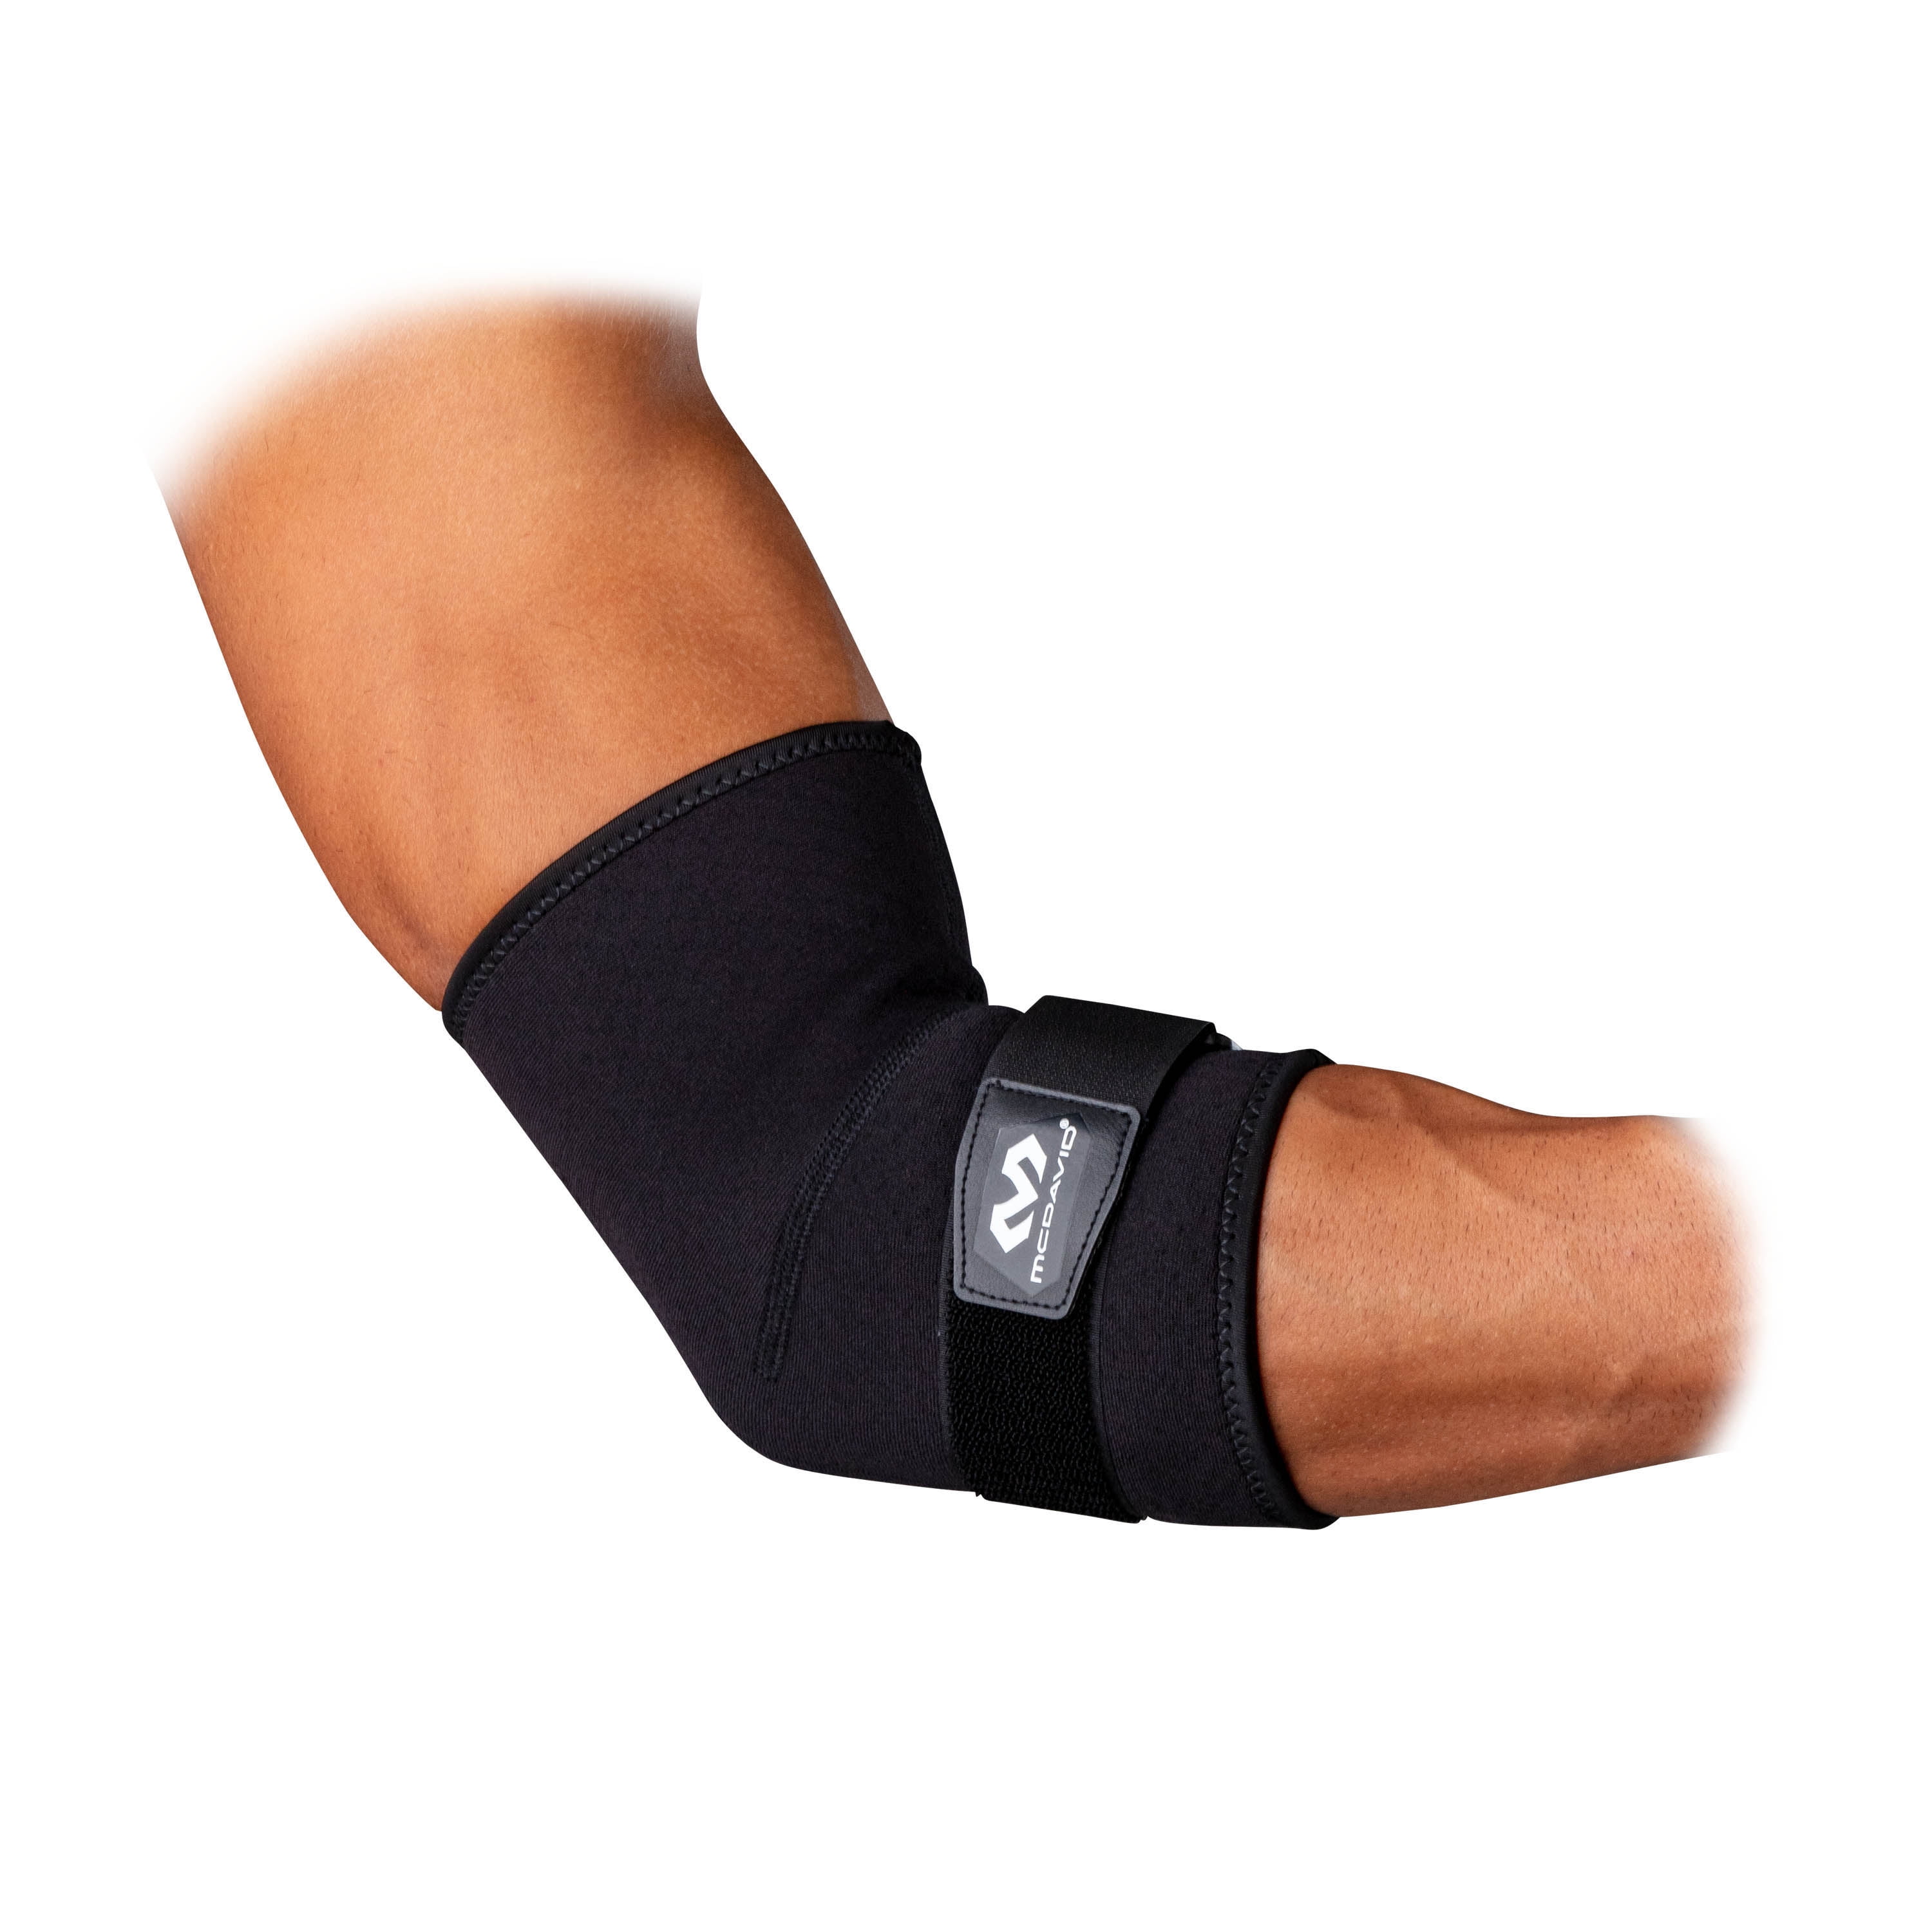 McDavid Sport Injury and Pain Relief Compression Black Elbow Sleeve with Strap Support, Large/Extra-Large